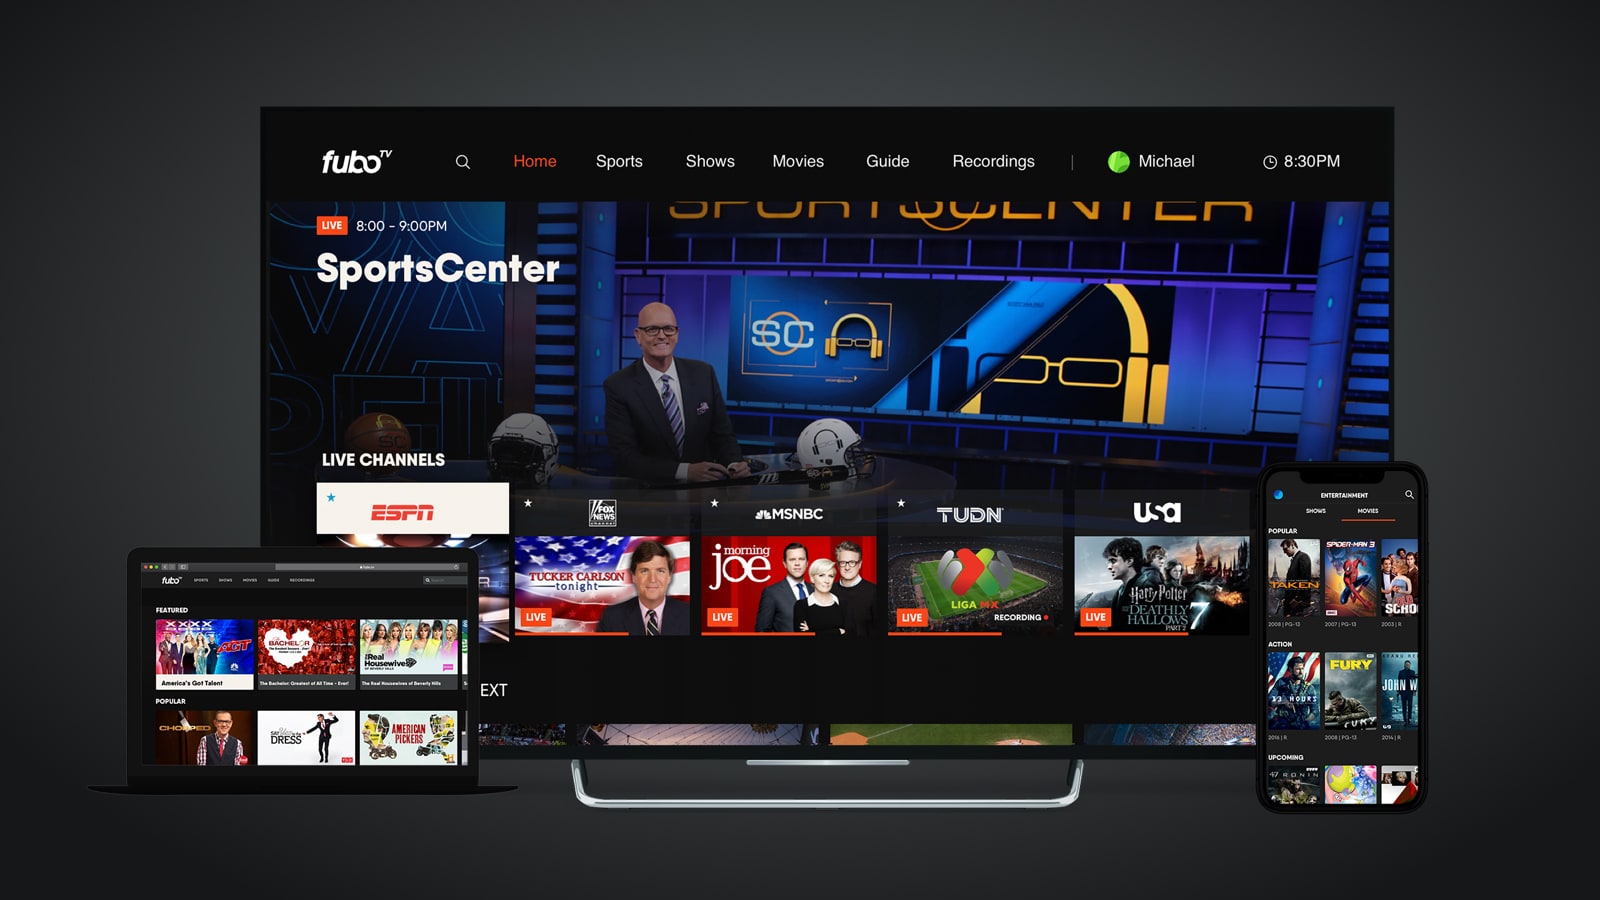 Fubotv Packages Prices In 2021 - Tv Channel Bundles Add-ons Extras More - Technadu